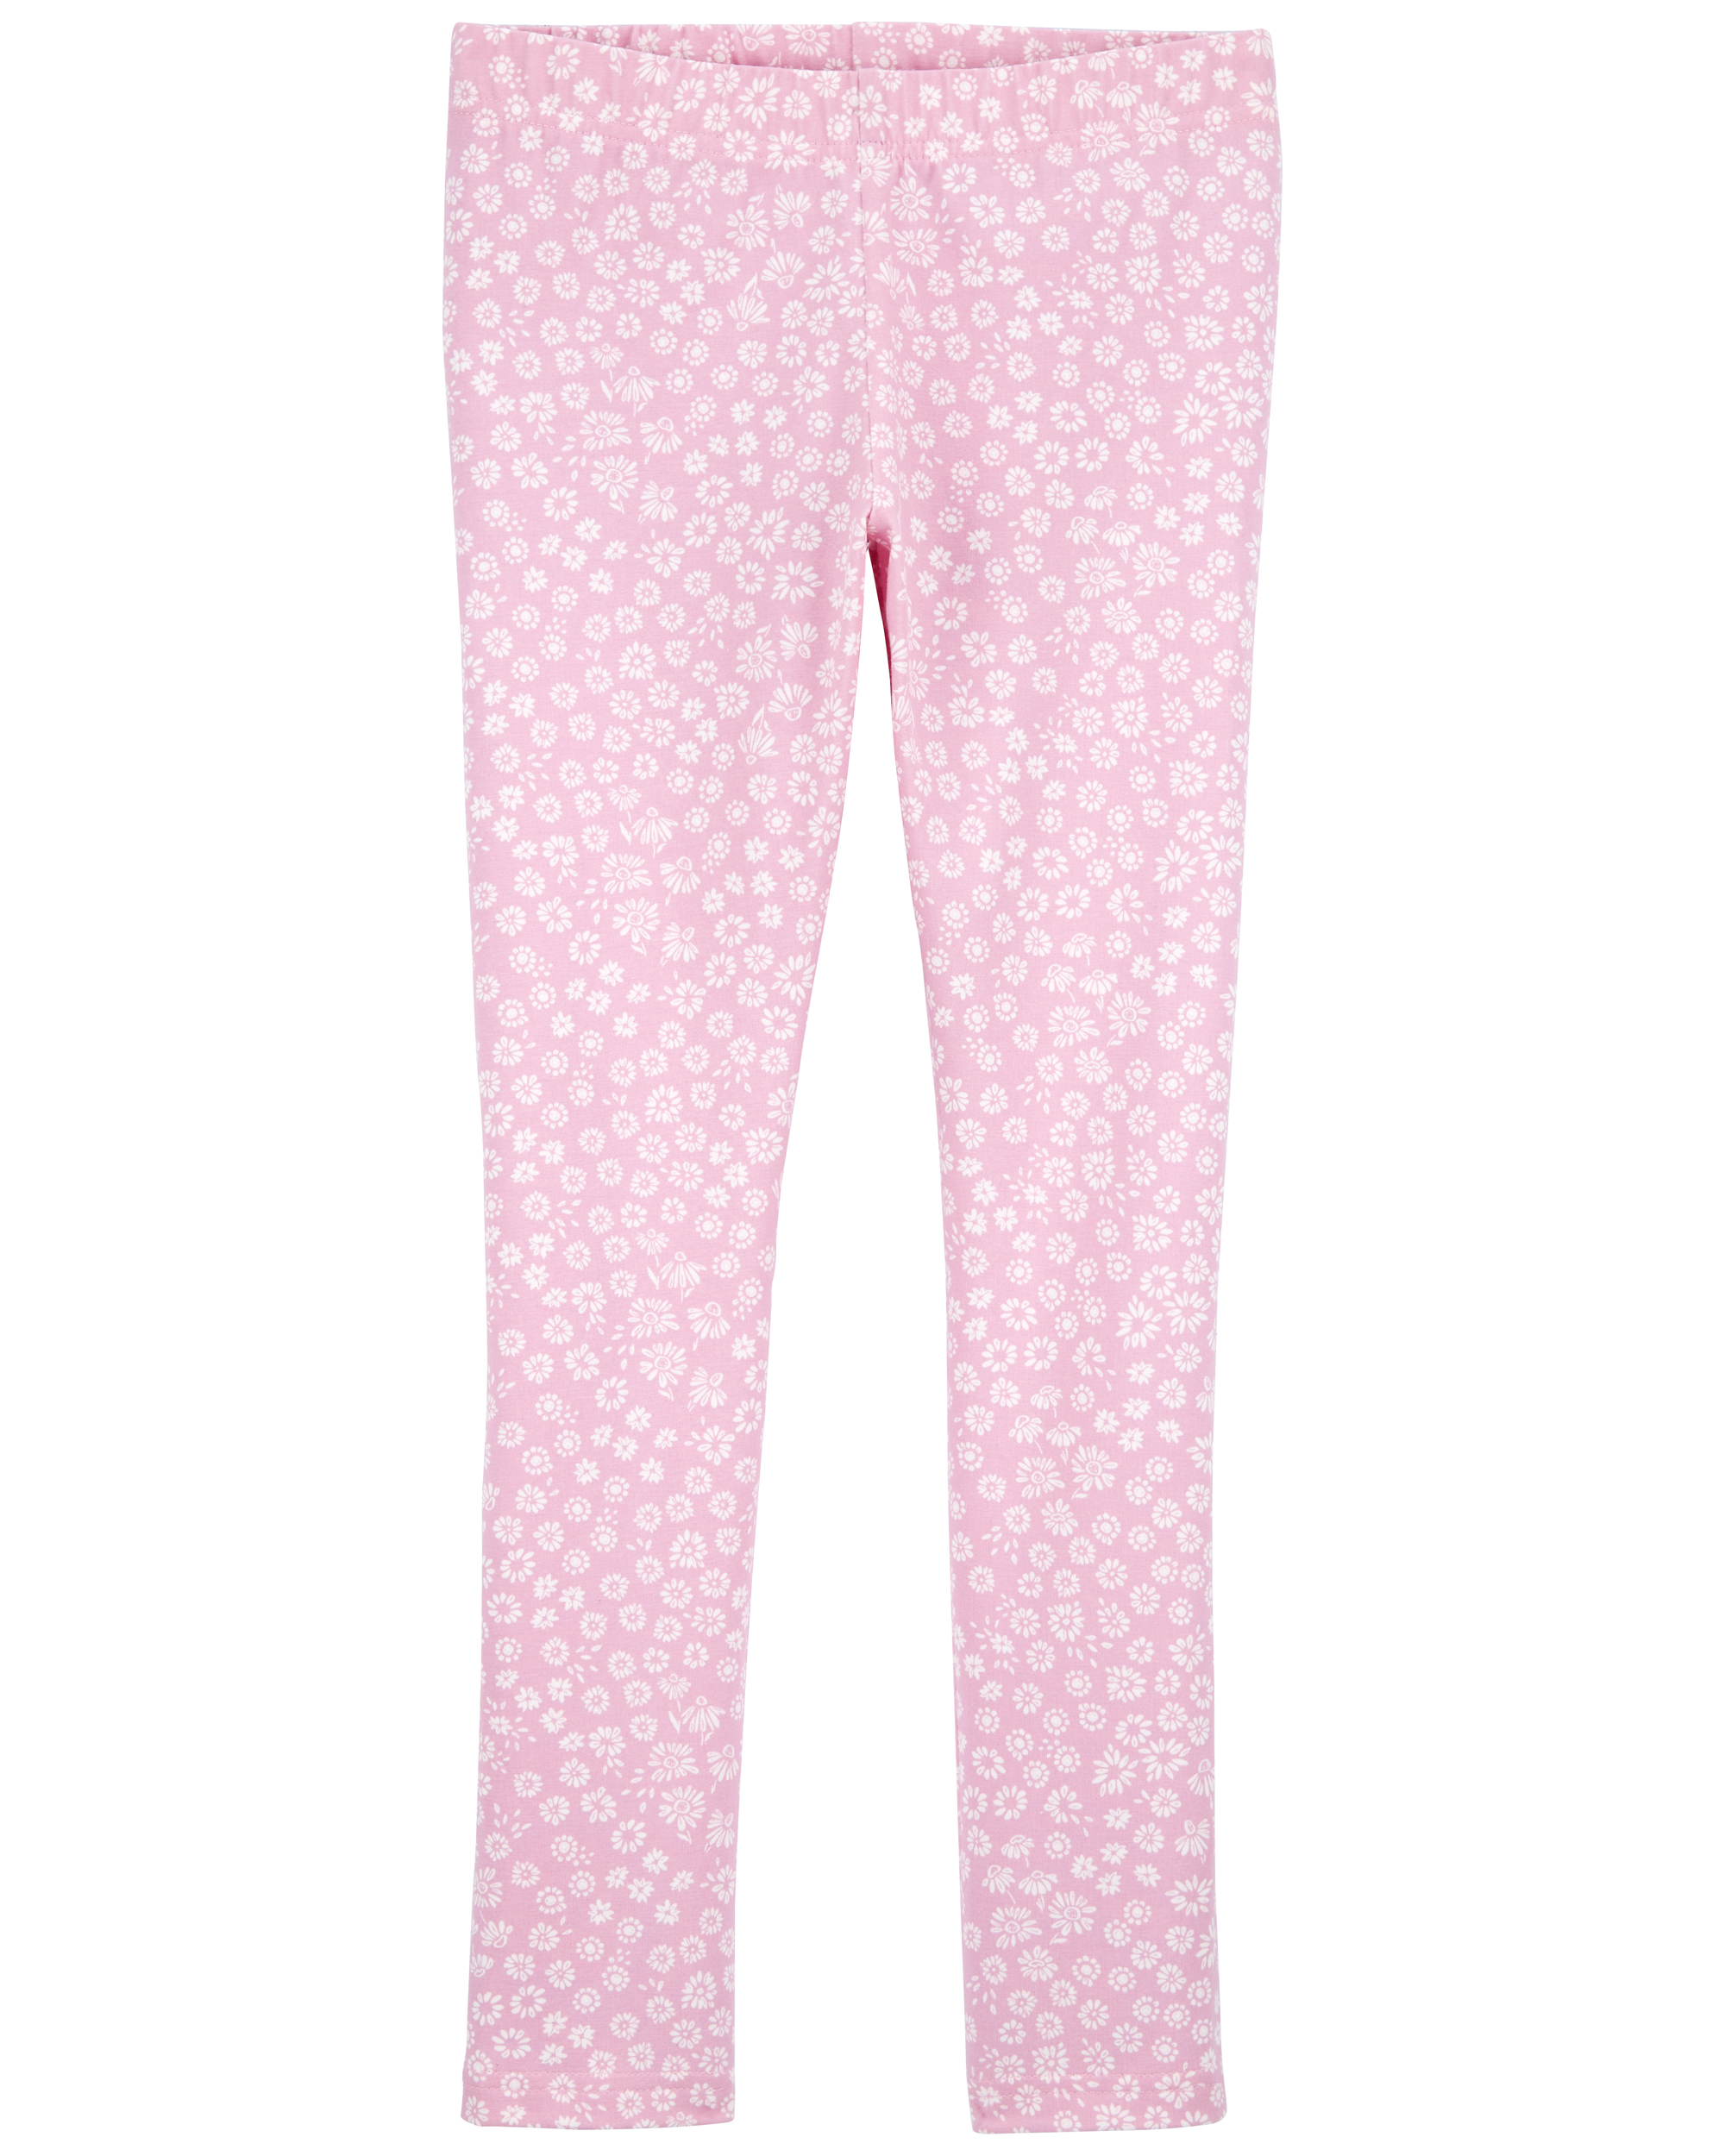 Pink Graphic Leggings – Unclaimed Baggage